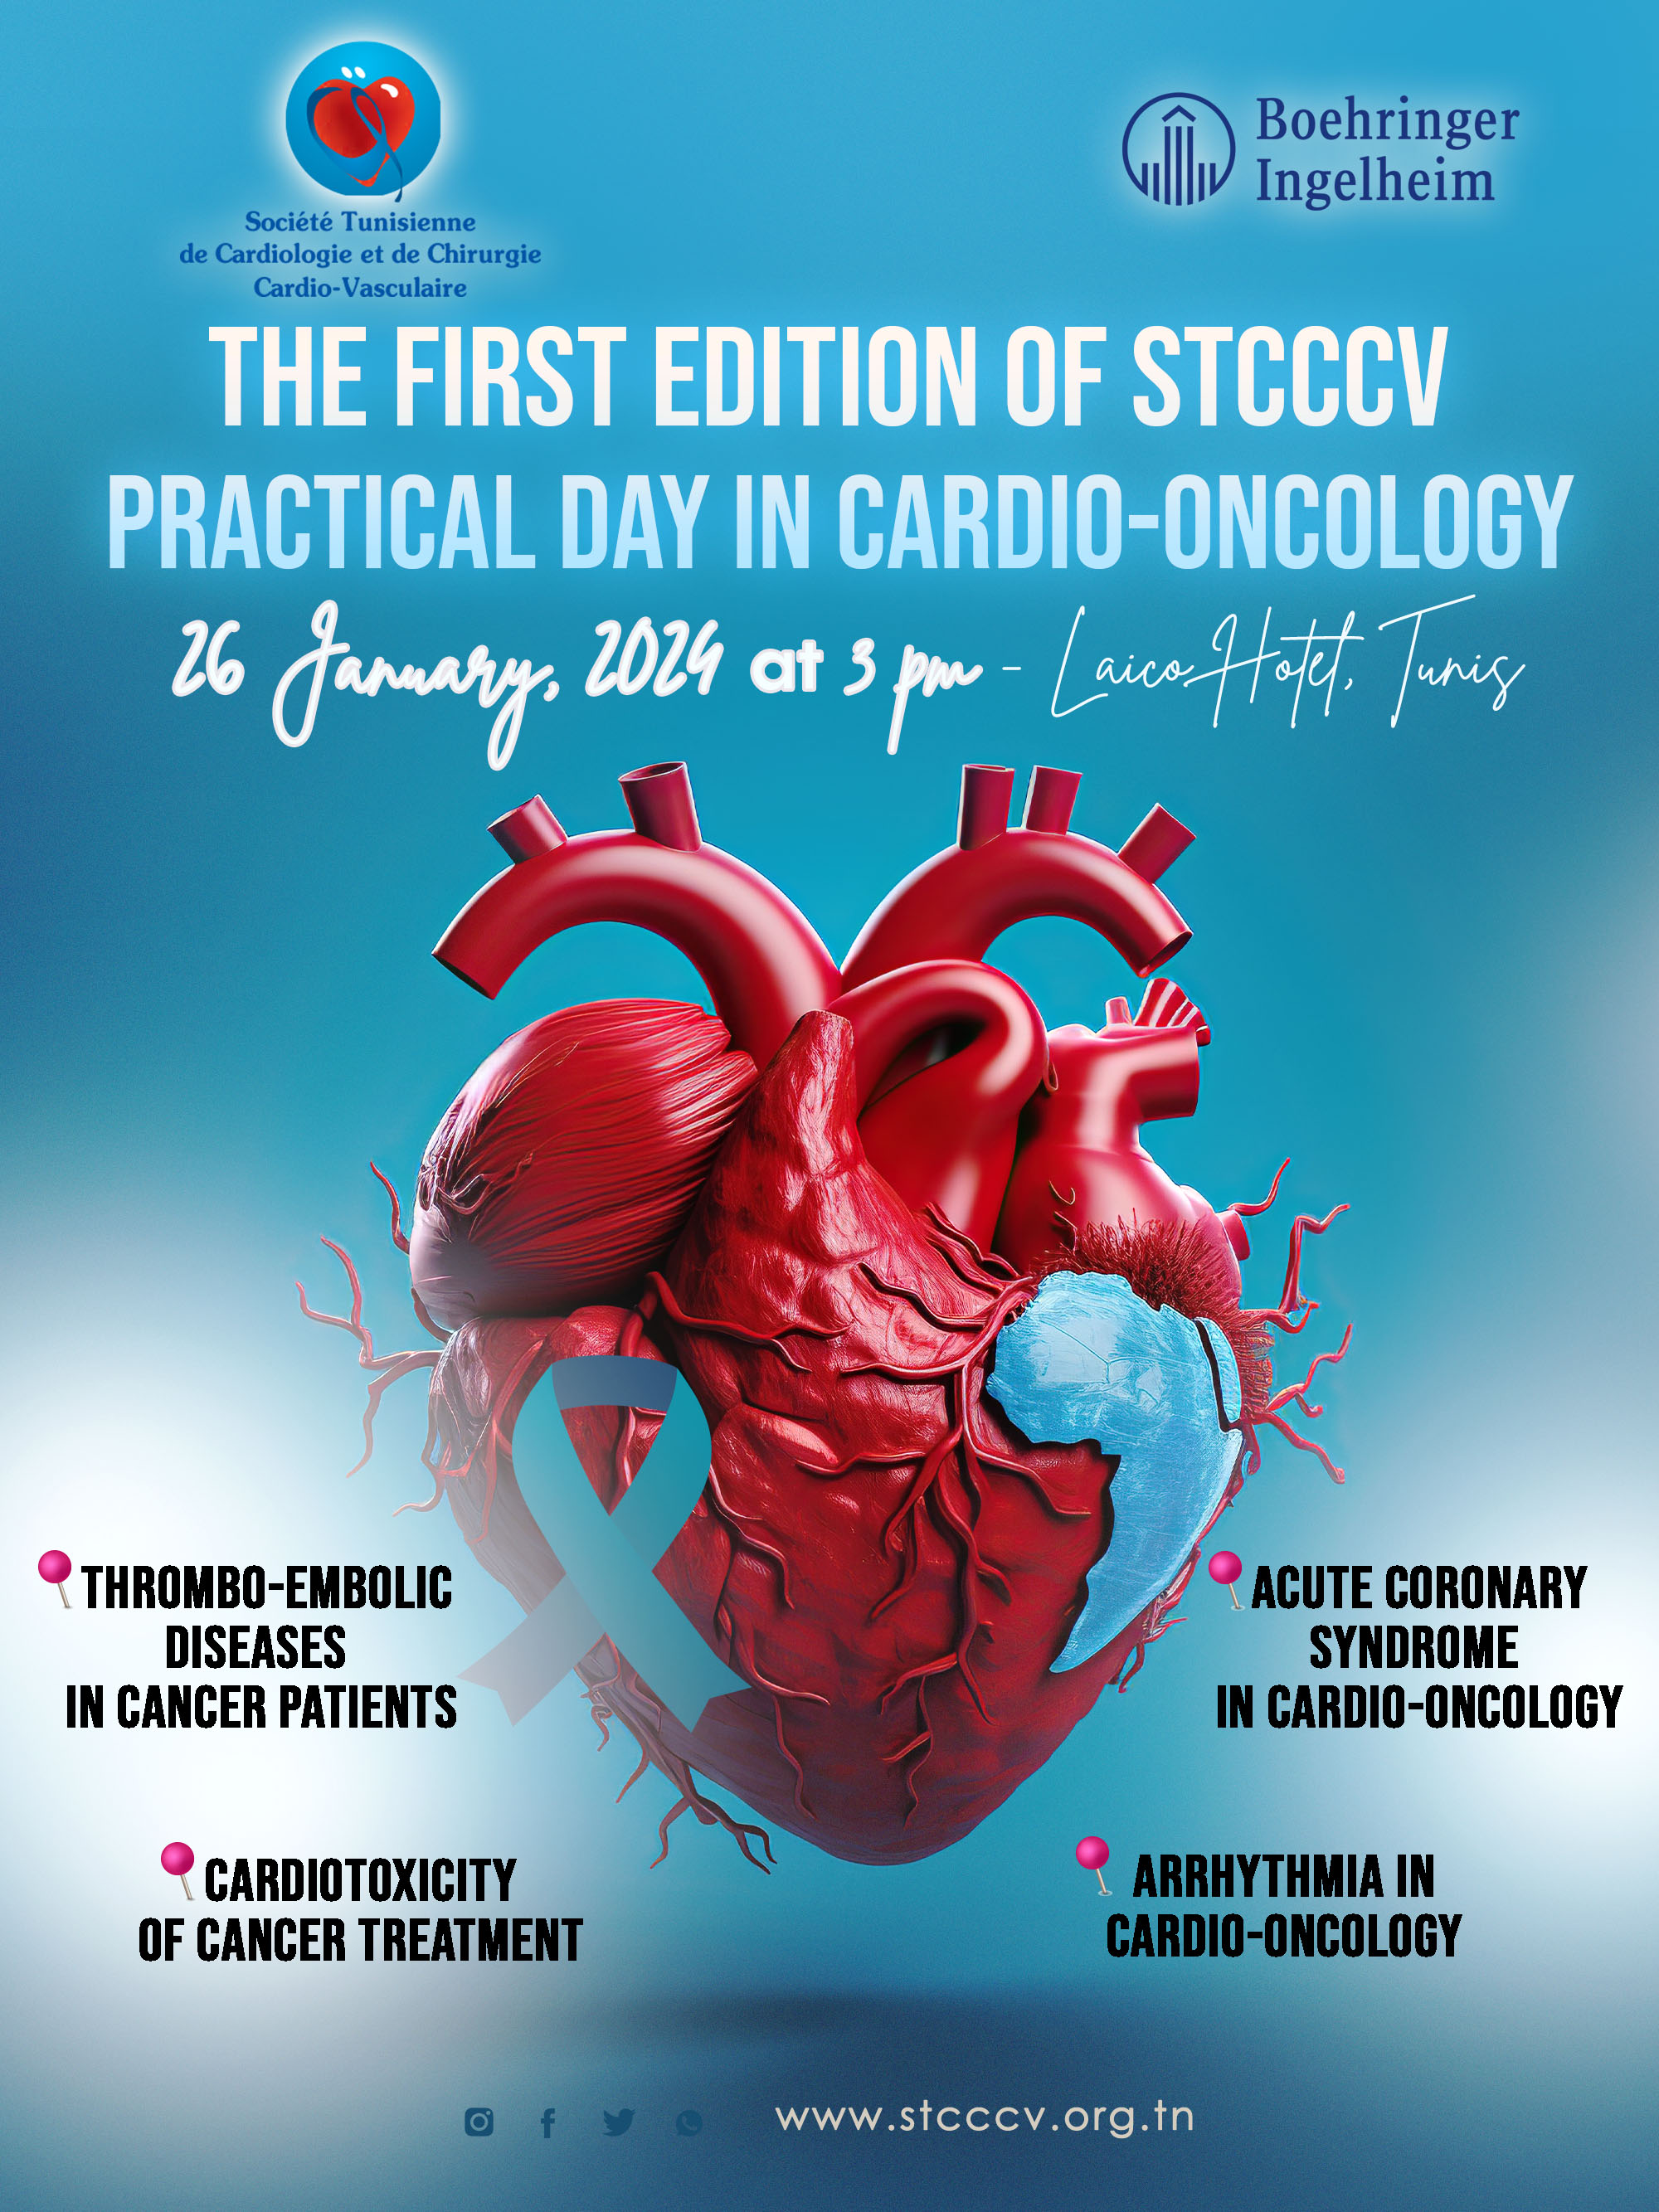 First edition of STCCCV practical day of cardio-oncology